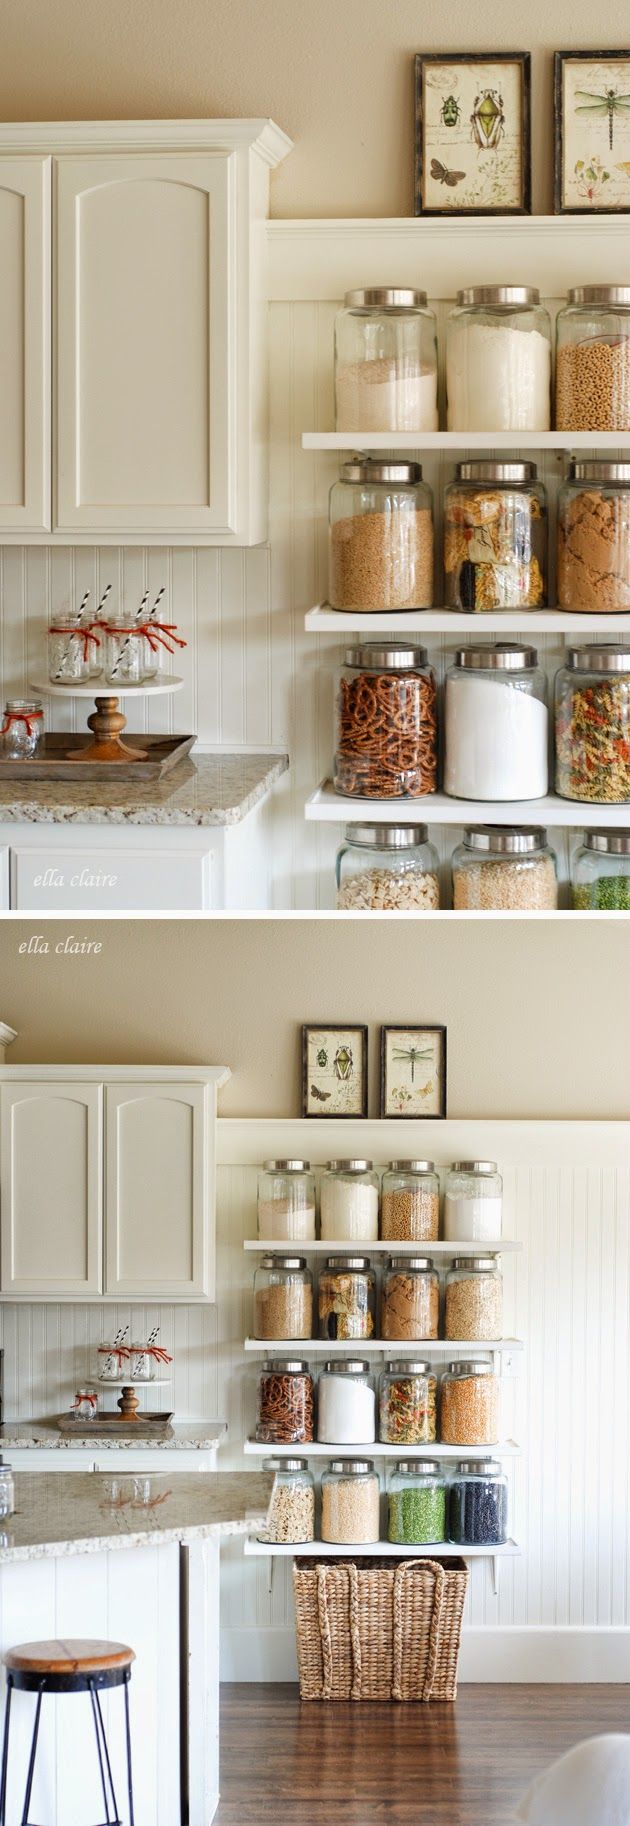 30+ Crazily Simple DIY Tips To Improve Your Kitchen   Architecture & Design